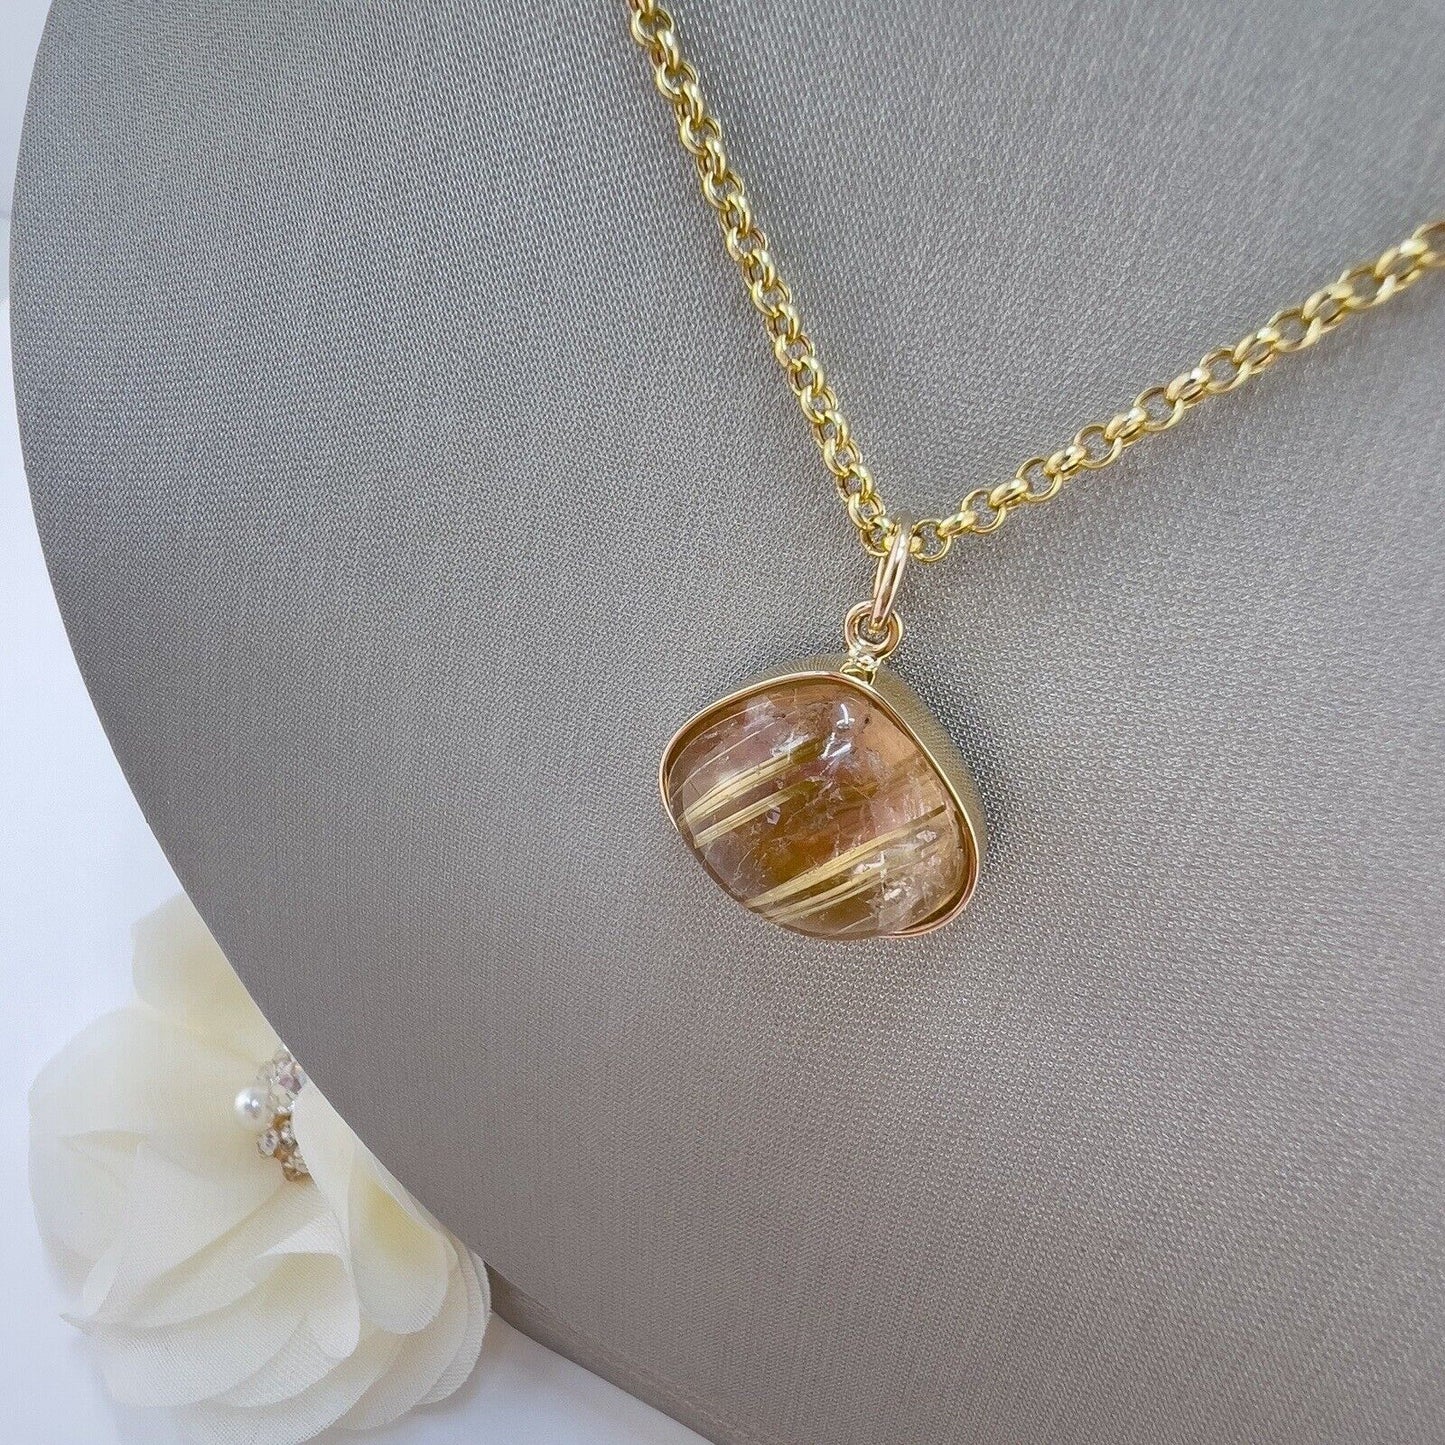 Genuine Rutilated Quartz Solid 14k Yellow Gold Drop Pendant, Newly Handcrafted